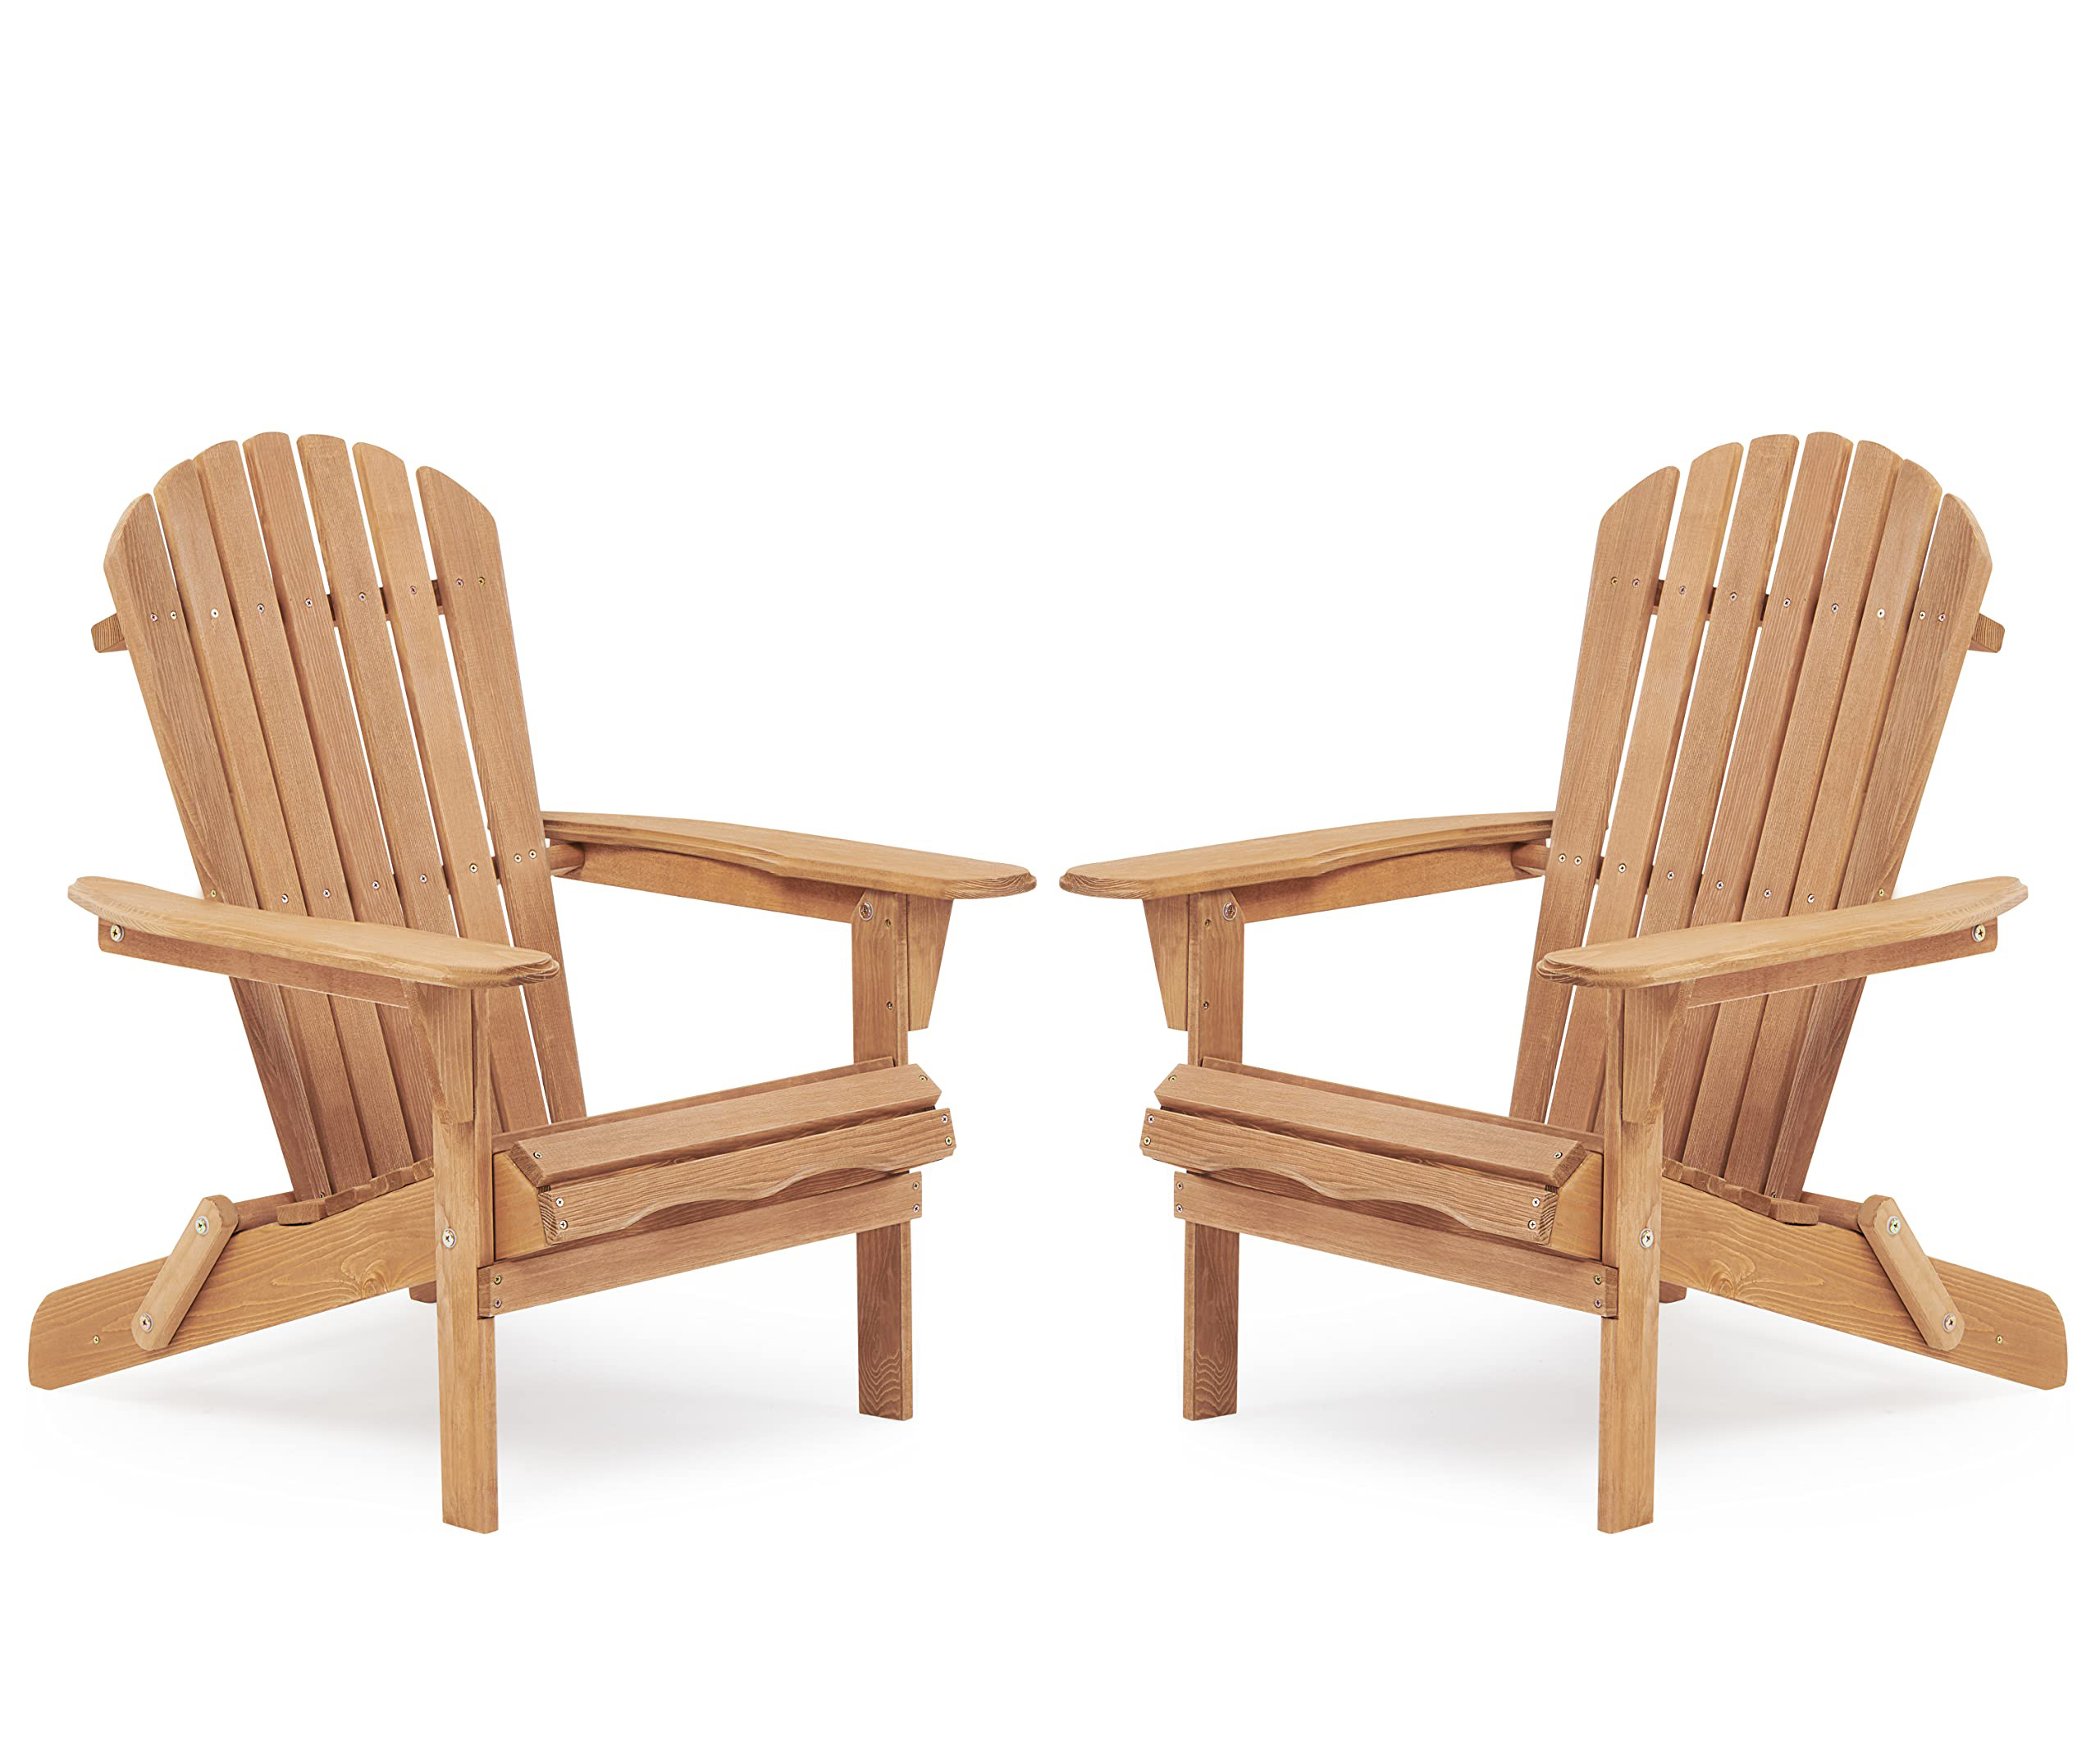 Wooden Outdoor Folding Adirondack Chair Set of 2 Wood Lounge Patio Chair for Garden,Garden, Lawn, Backyard, Deck, Pool Side, Fire Pit,Half Assembled, - image 1 of 5